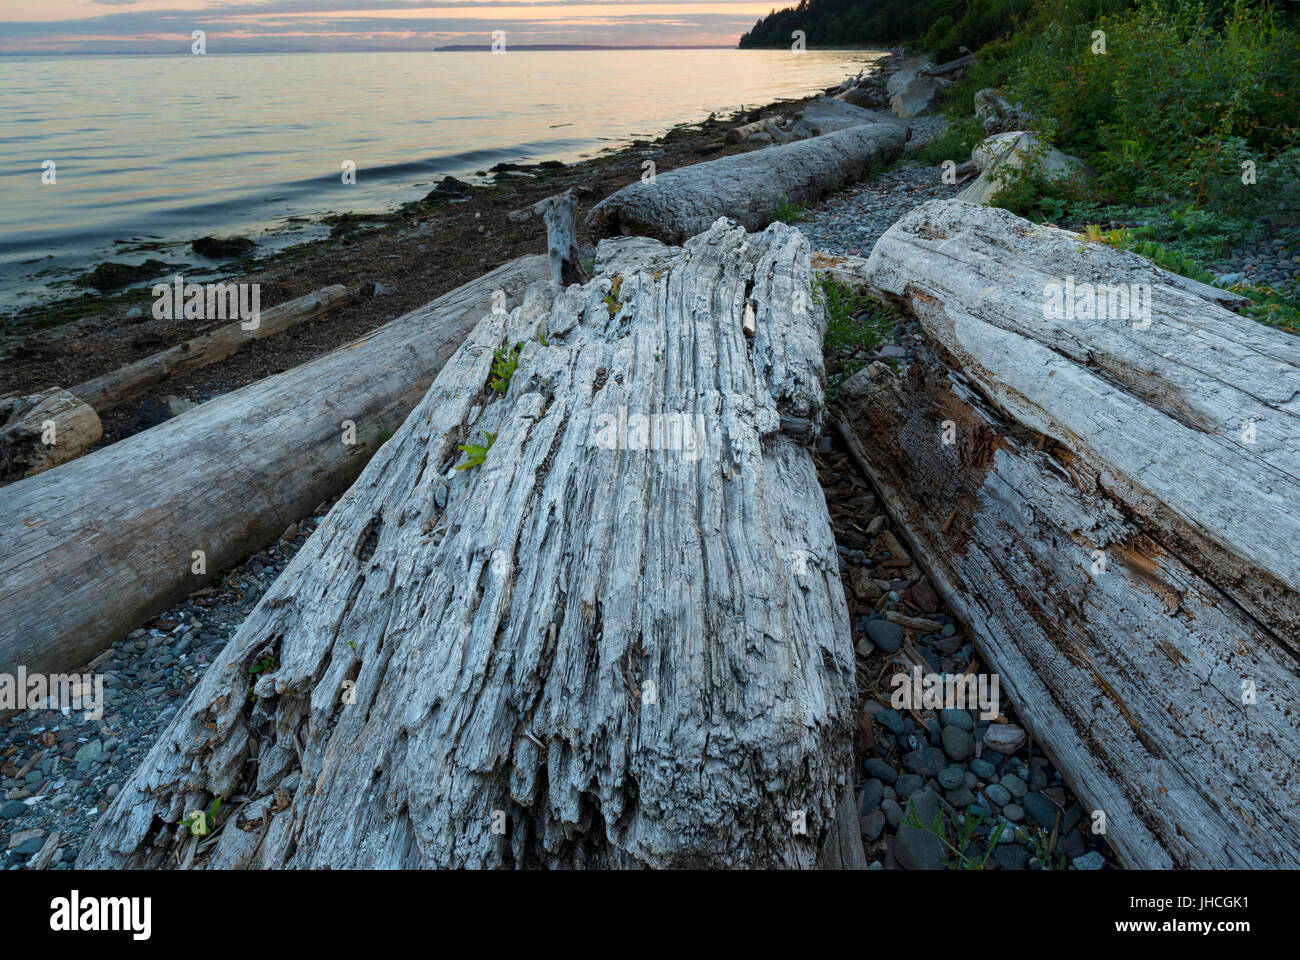 Landscapes and Waterscapes of the Pacific North West of British Columbia Canada. Stock Photo